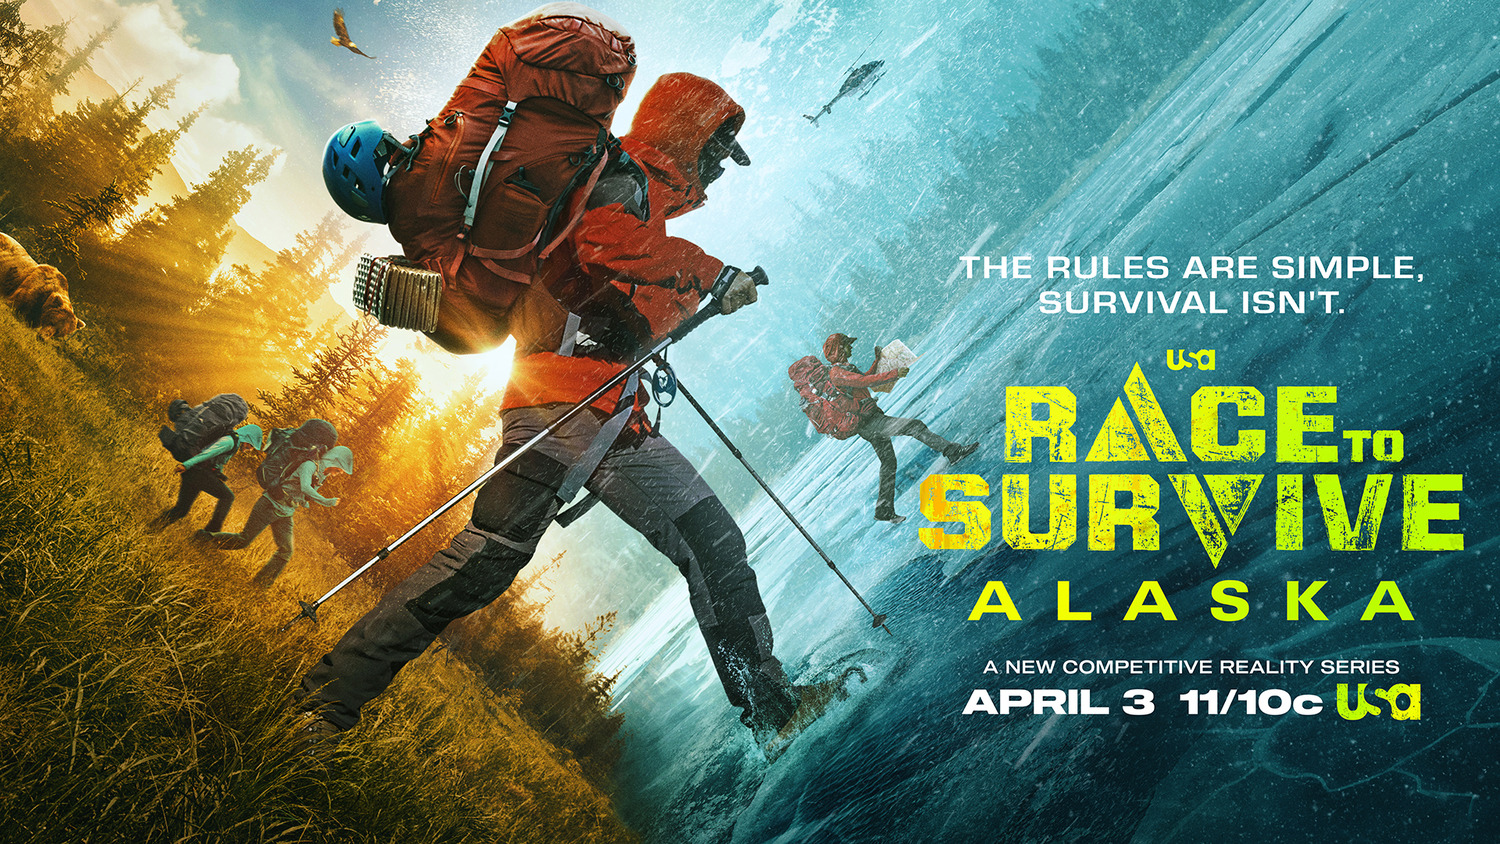 Extra Large TV Poster Image for Race to Survive Alaska (#4 of 6)